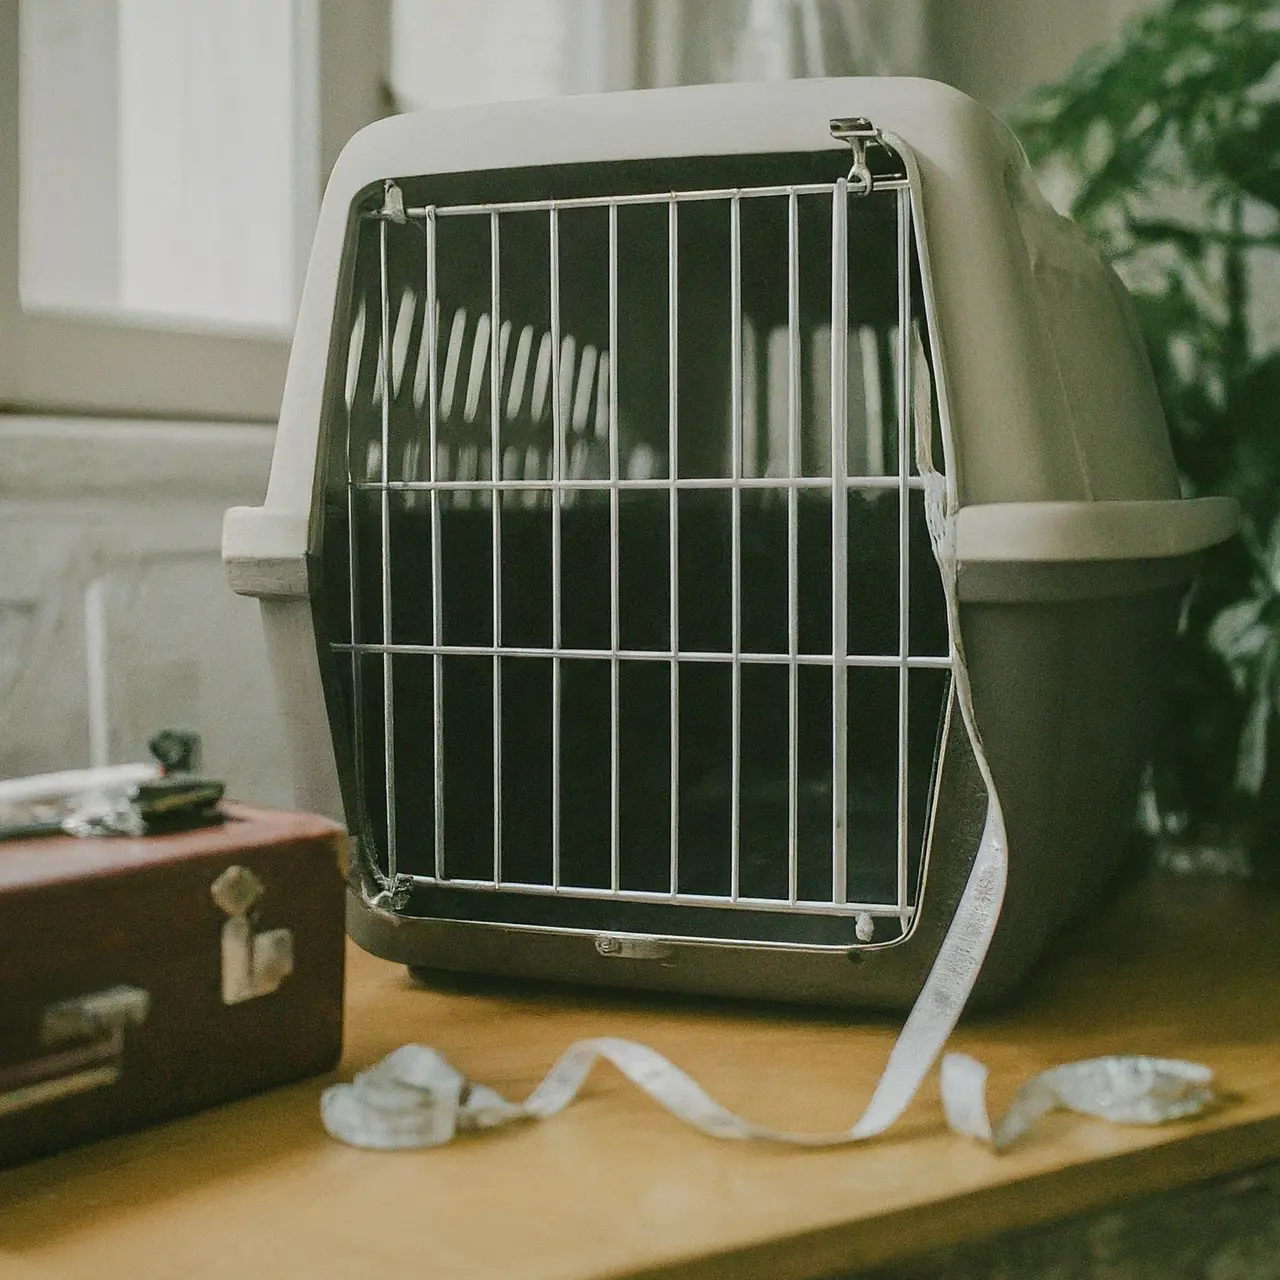 A dog crate next to a measuring tape and suitcase. 35mm stock photo